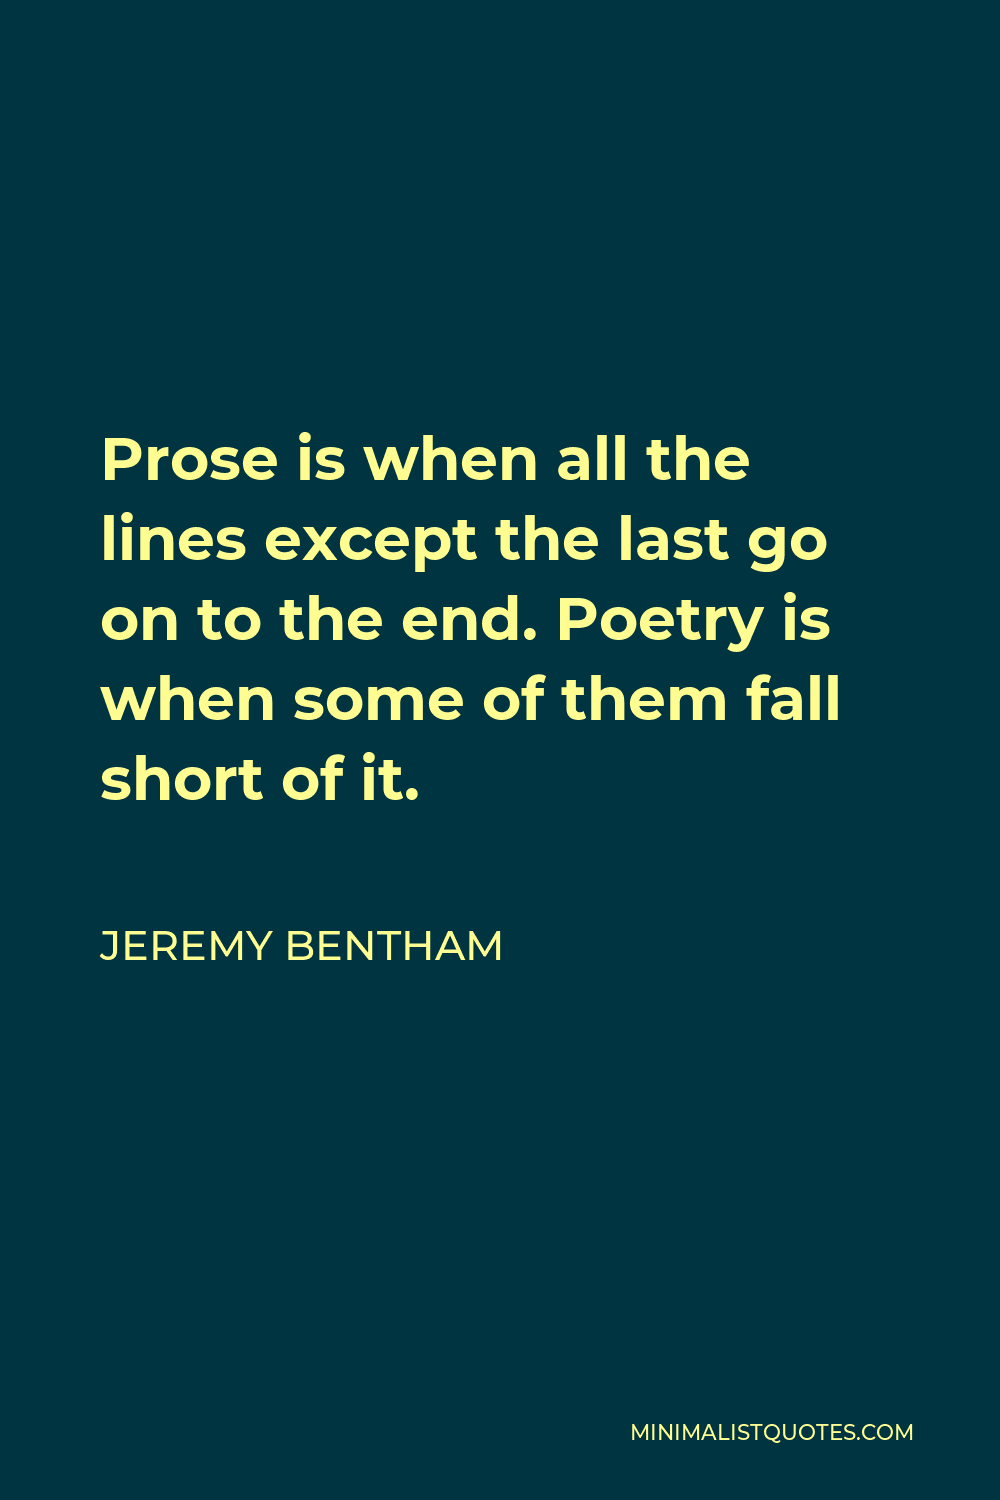 Jeremy Bentham Quote - Prose is when all the lines except the last go on to the end. Poetry is when some of them fall short of it.